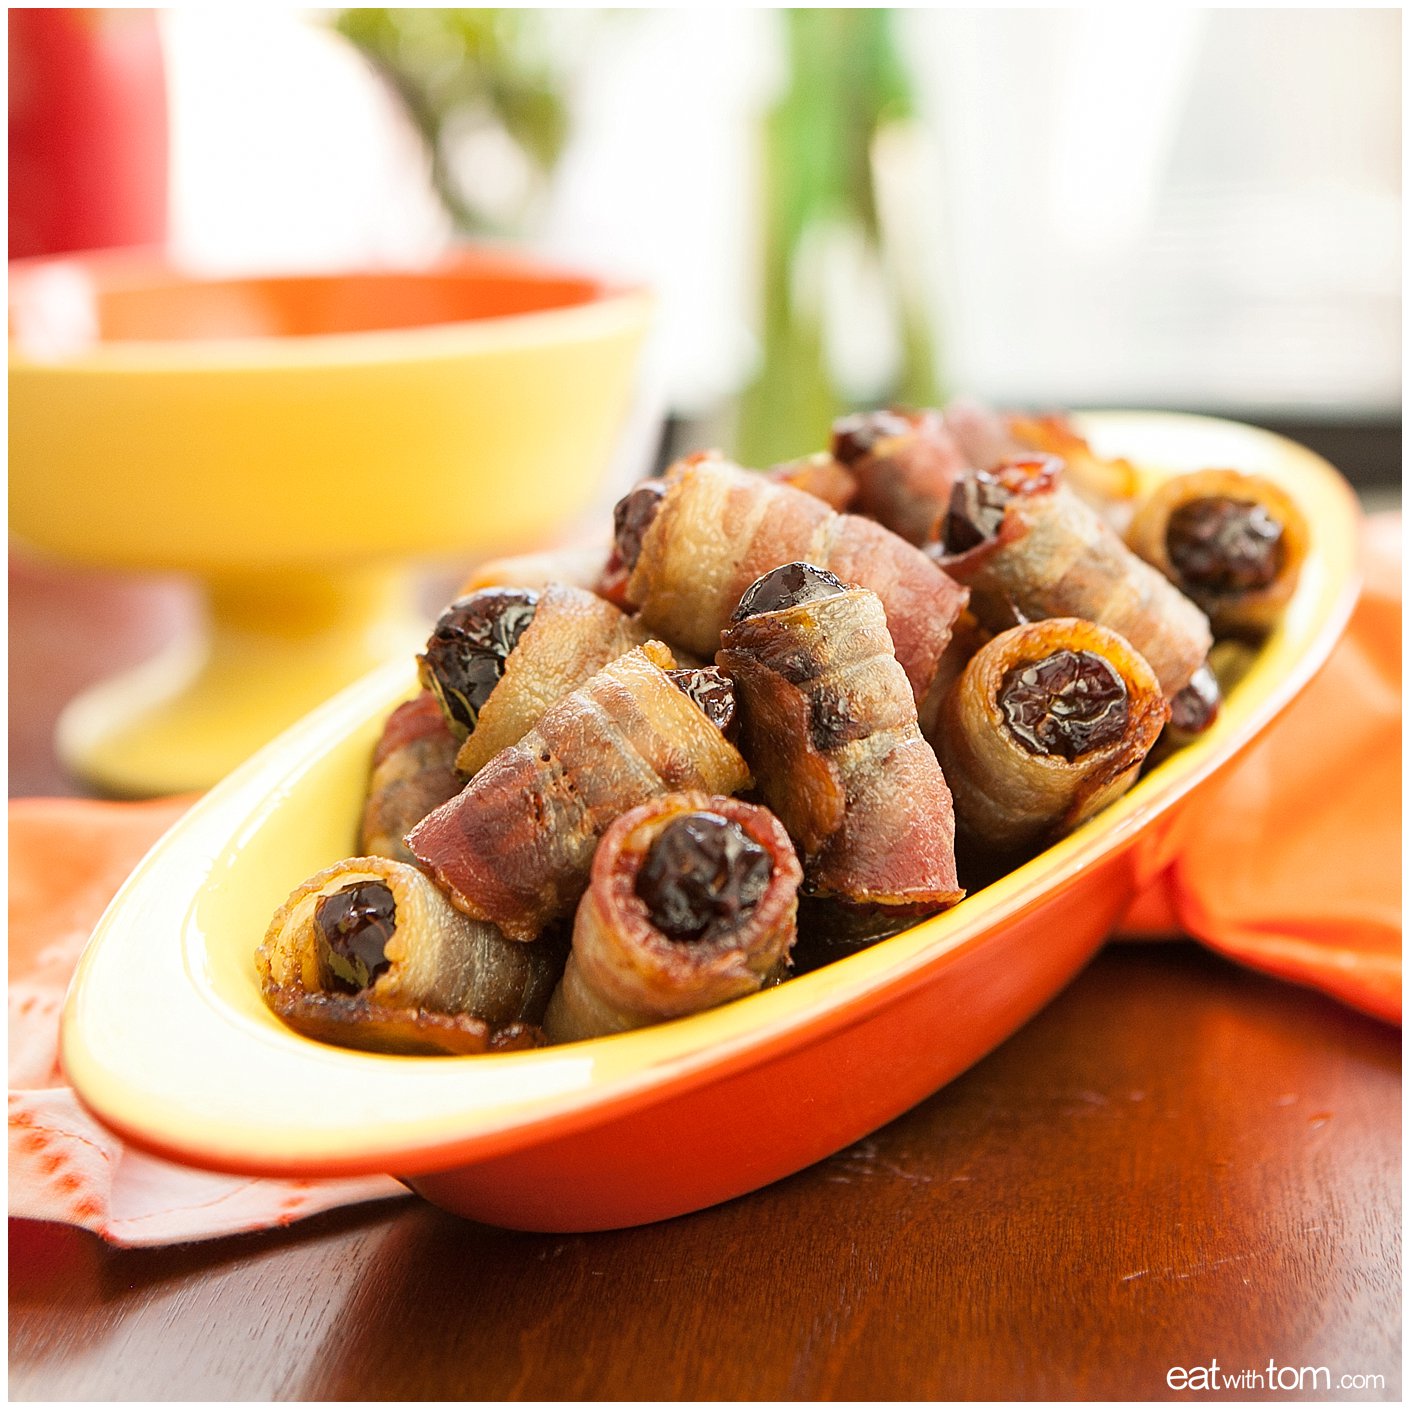 bacon wrapped dates recipe instructions - eat with tom photographer